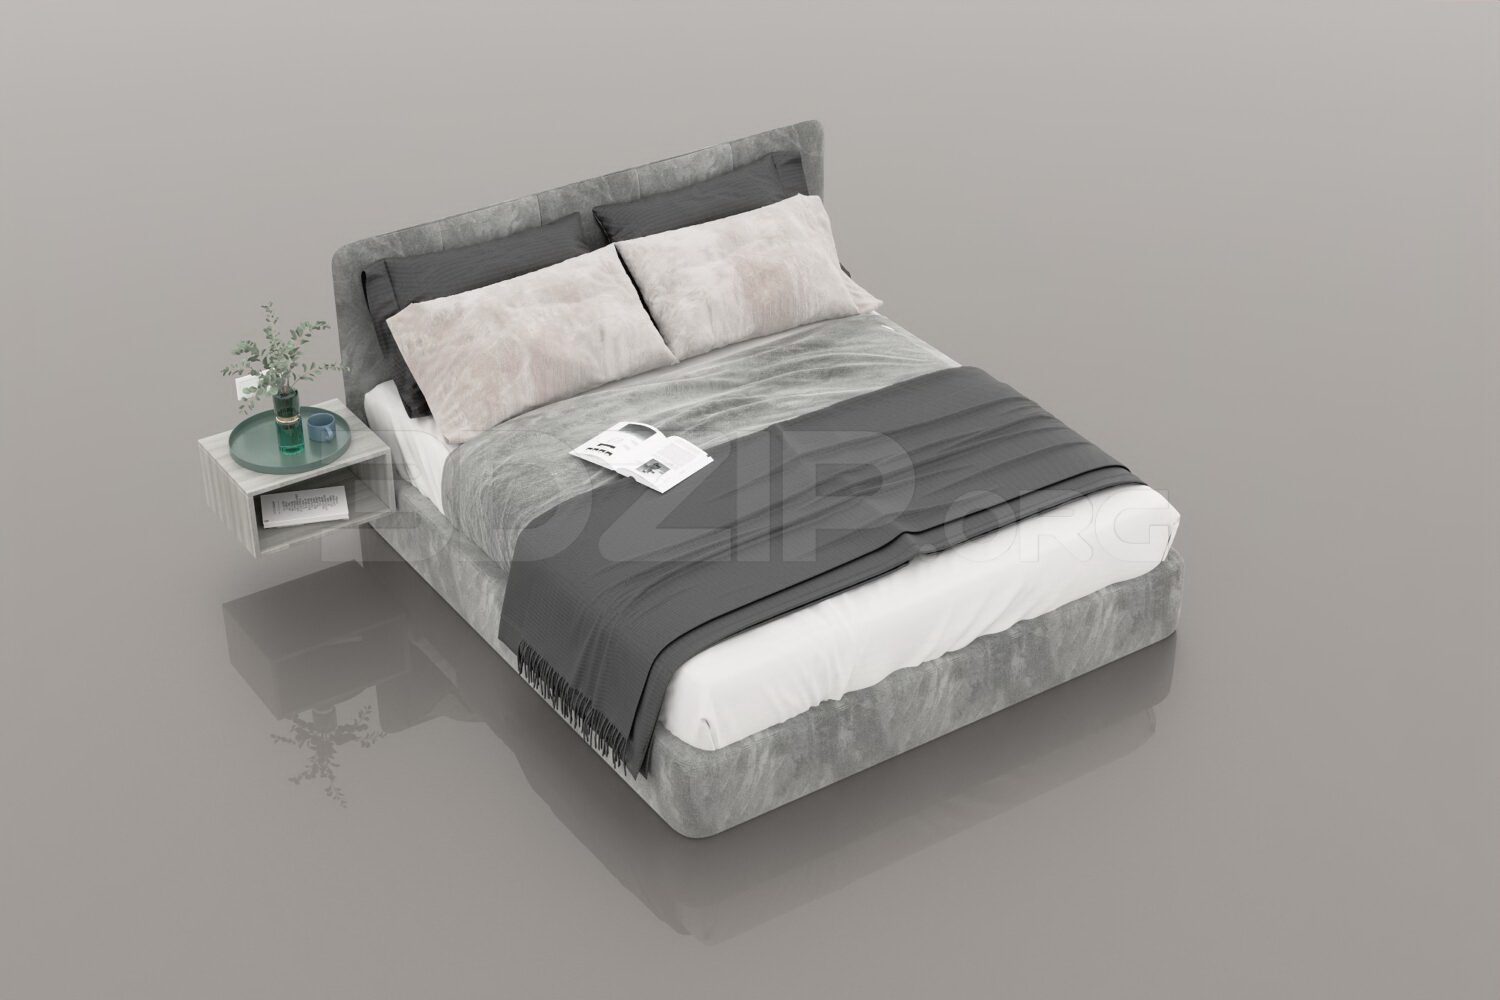 230. Download Free Bed Model By Tuan An